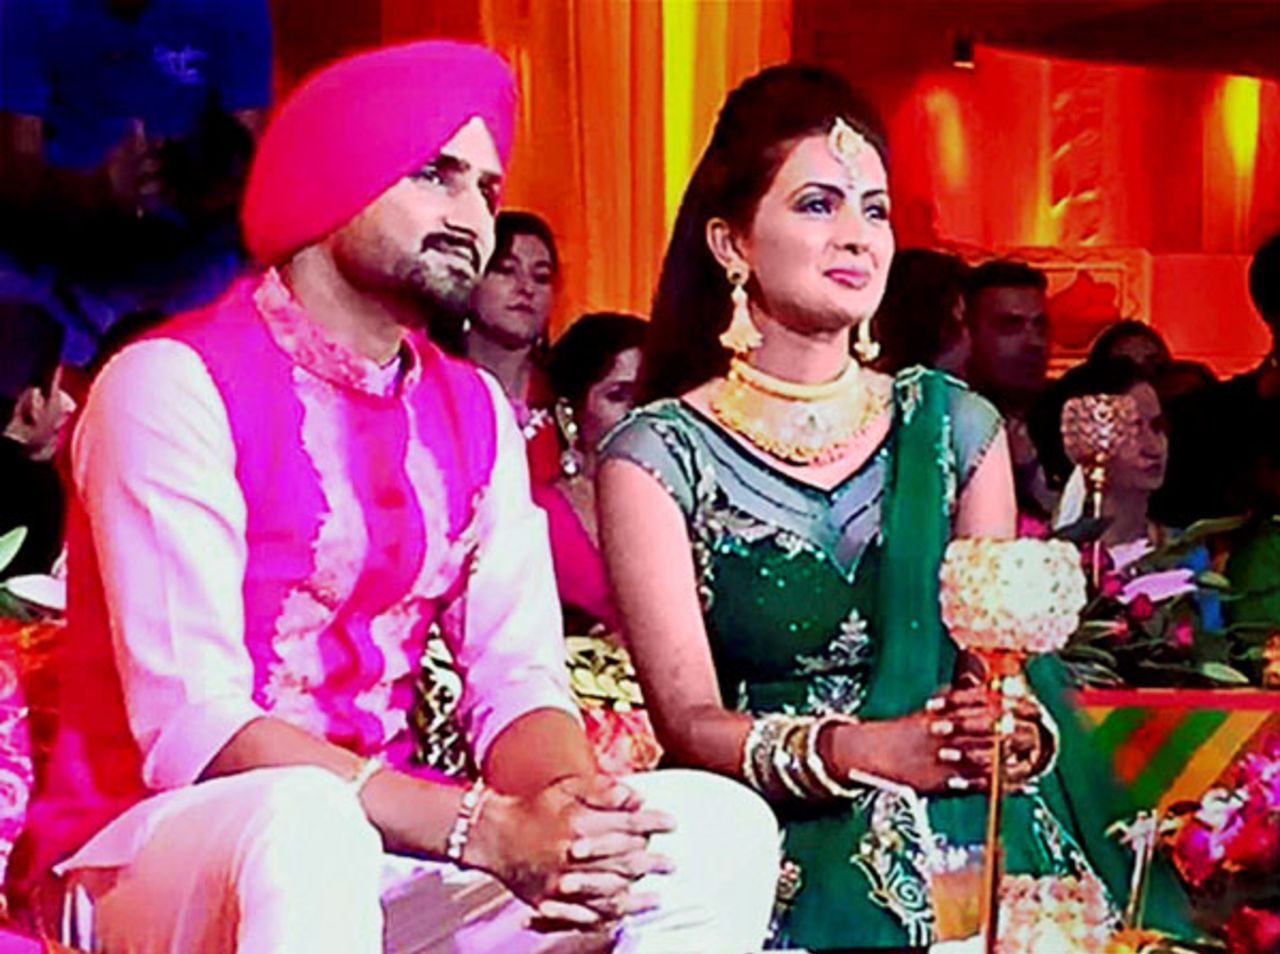 Harbhajan Singh with his wife-to-be, actor Geeta Basra, at a pre-wedding ceremony, Jalandhar, October 27, 2015